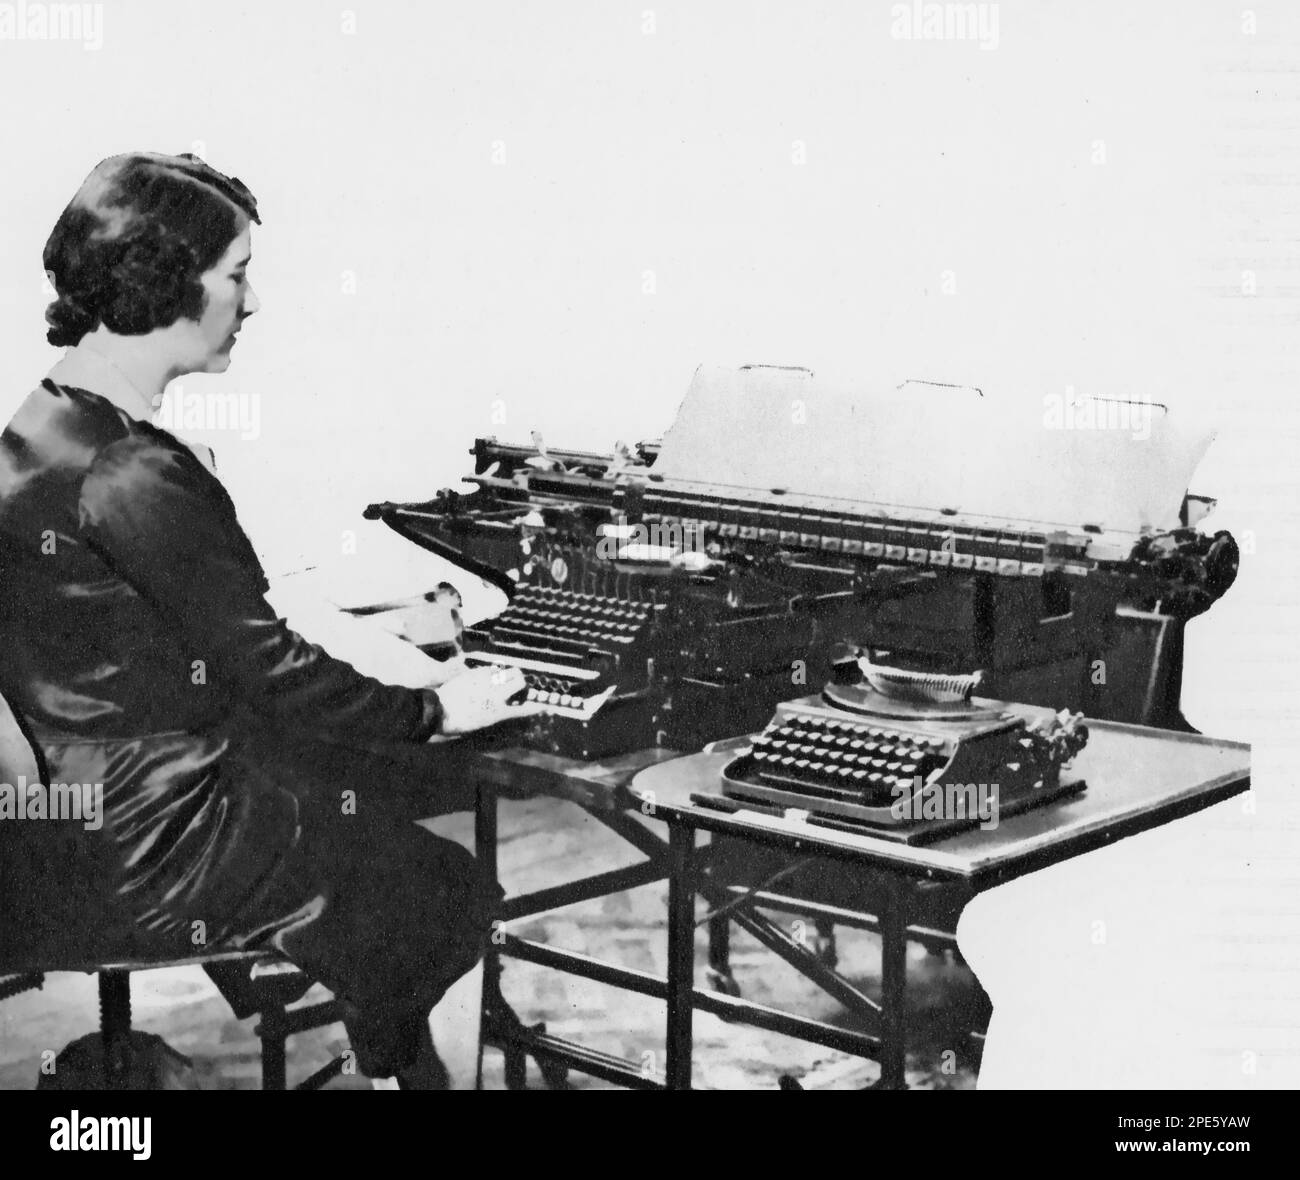 A woman using a tabulating machine, c1933. The tabulating machine was an electromechanical machine designed to assist in summarising information stored on punched cards. Invented by Herman Hollerith (1860-1929), the machine was developed to help process data for the 1890 U.S. Census. Later models were widely used for business applications such as accounting and inventory control. Stock Photo